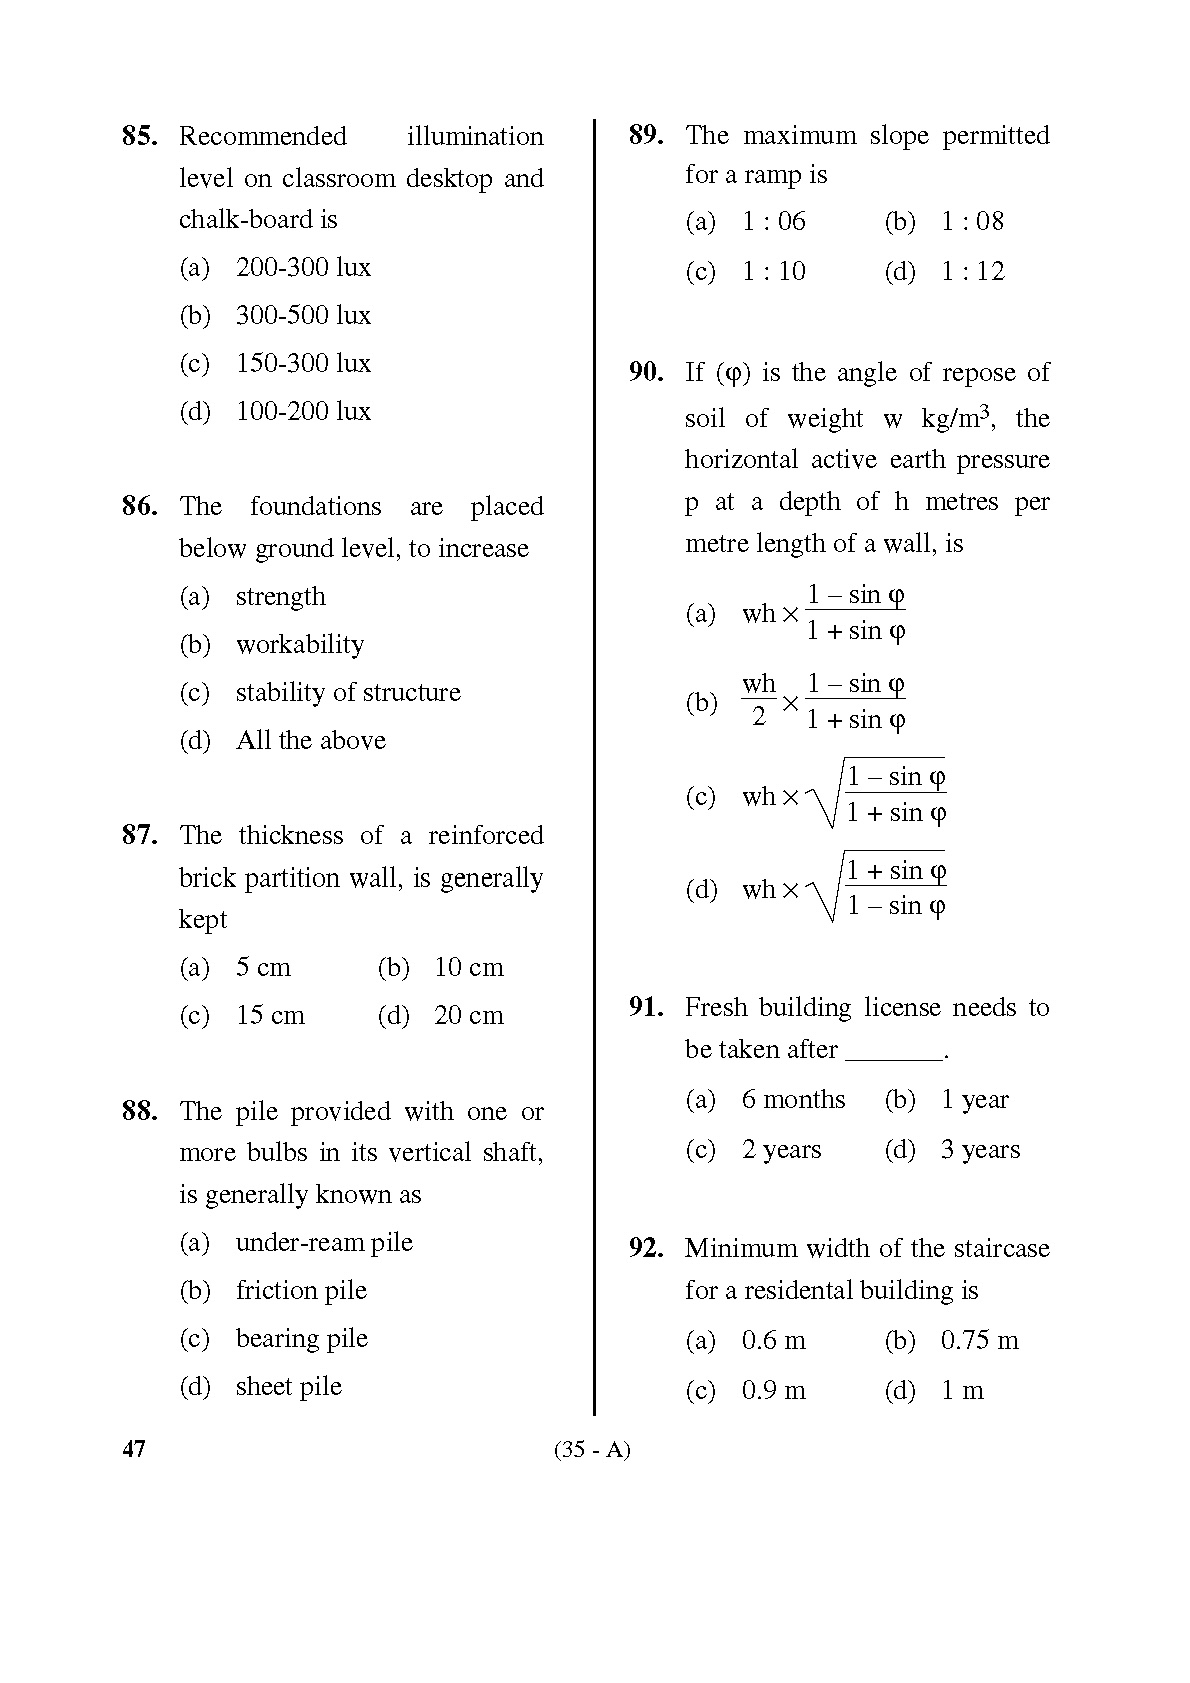 Karnataka PSC Town Planners Exam Sample Question Paper 34